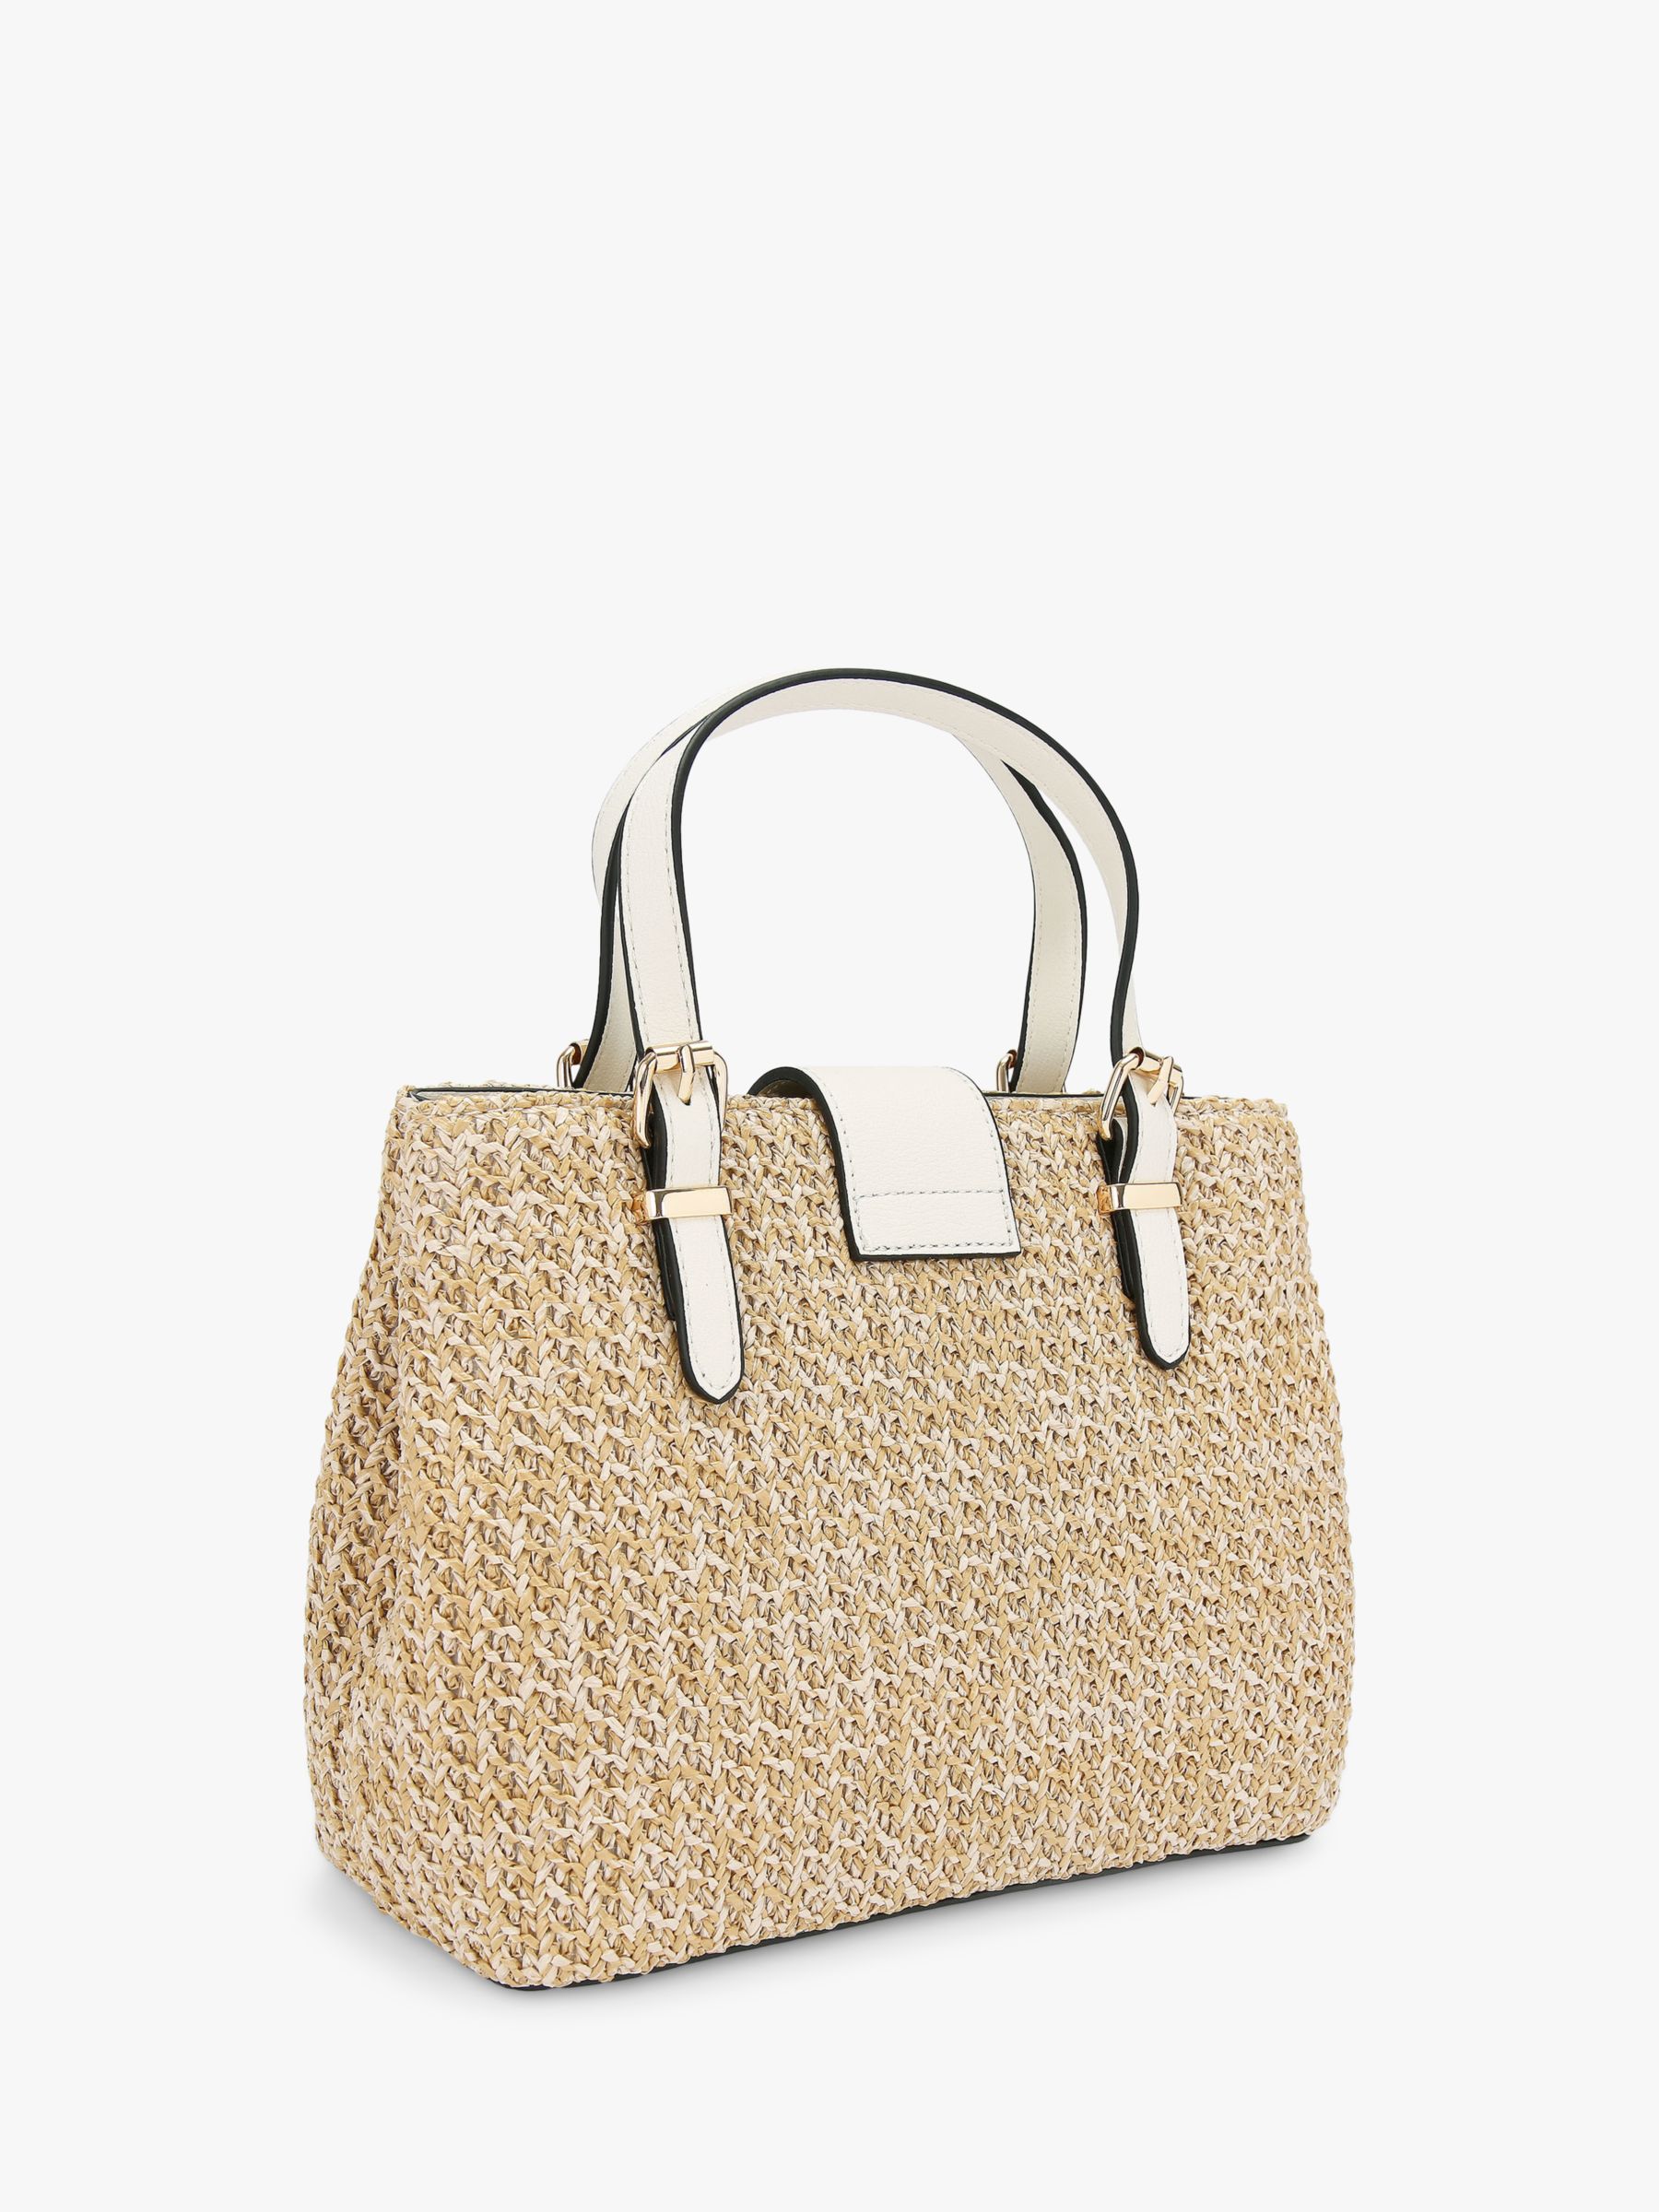 Carvela Micro Mandy Tote Bag, Natural/Putty, One Size